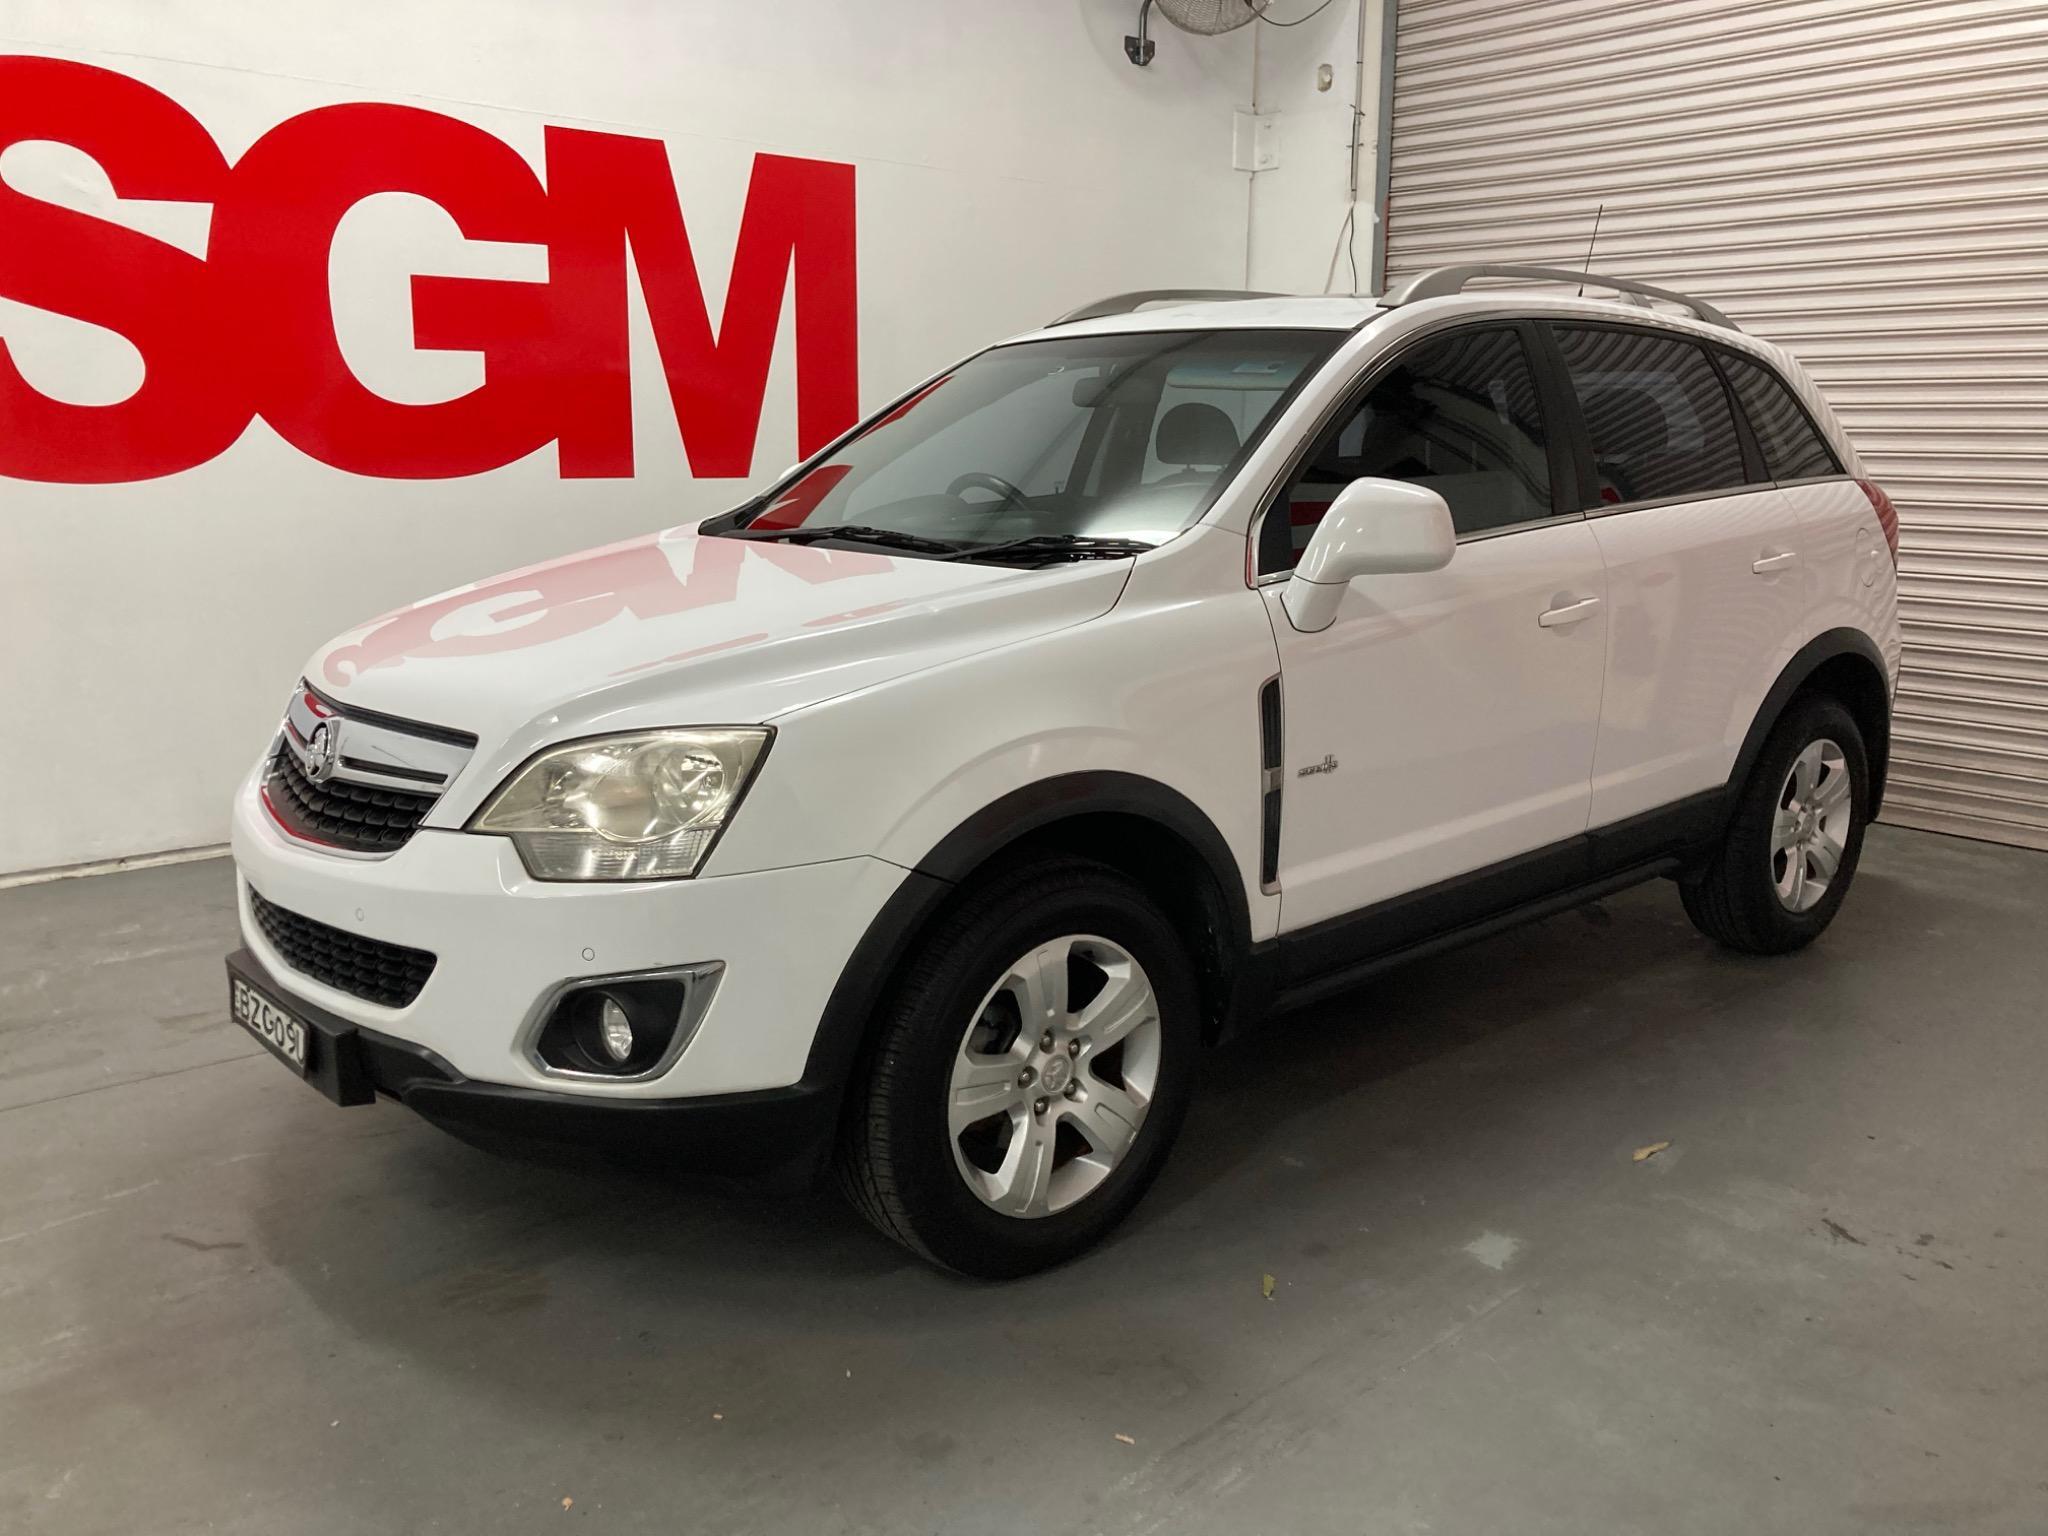 2011 Holden Captiva CG Series II 5 LT Wagon 5dr Spts Auto 6sp 2.4i (FWD) Picture 8